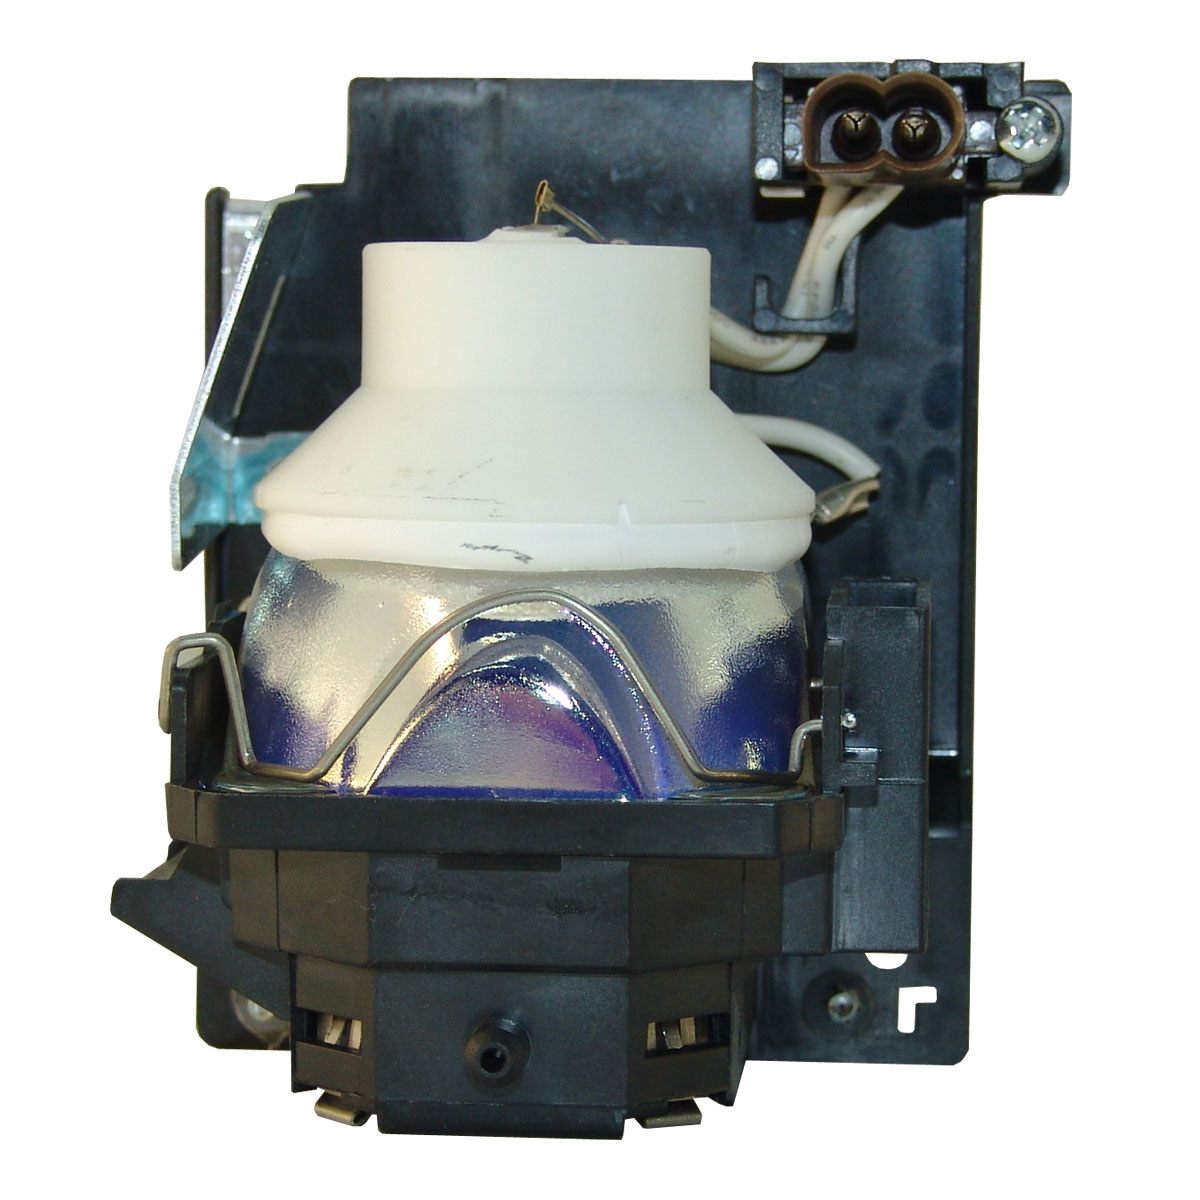 HCP-Q3 Hitachi Projector Lamp Replacement Projector Lamp Assembly with High Quality Genuine Original Ushio Bulb Inside.